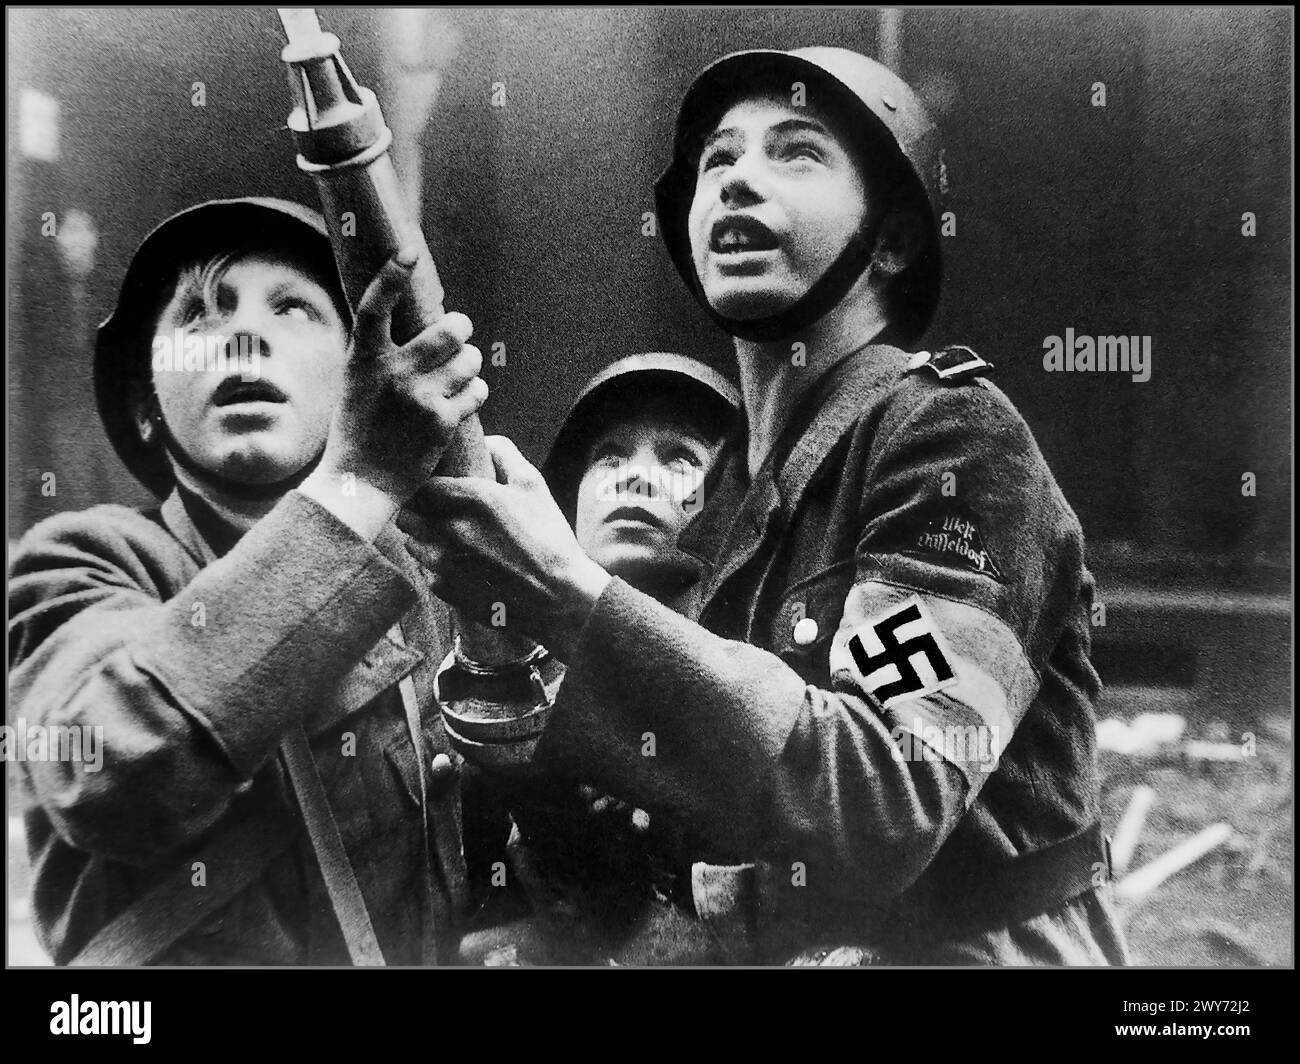 WW2 1943 with Hitler Youth Hitlerjugend young boys, Adolf Hitler's last hope against the advancing Allied Armies, fighting allied bombing fires in Dusseldorf Nazi Germany Stock Photo